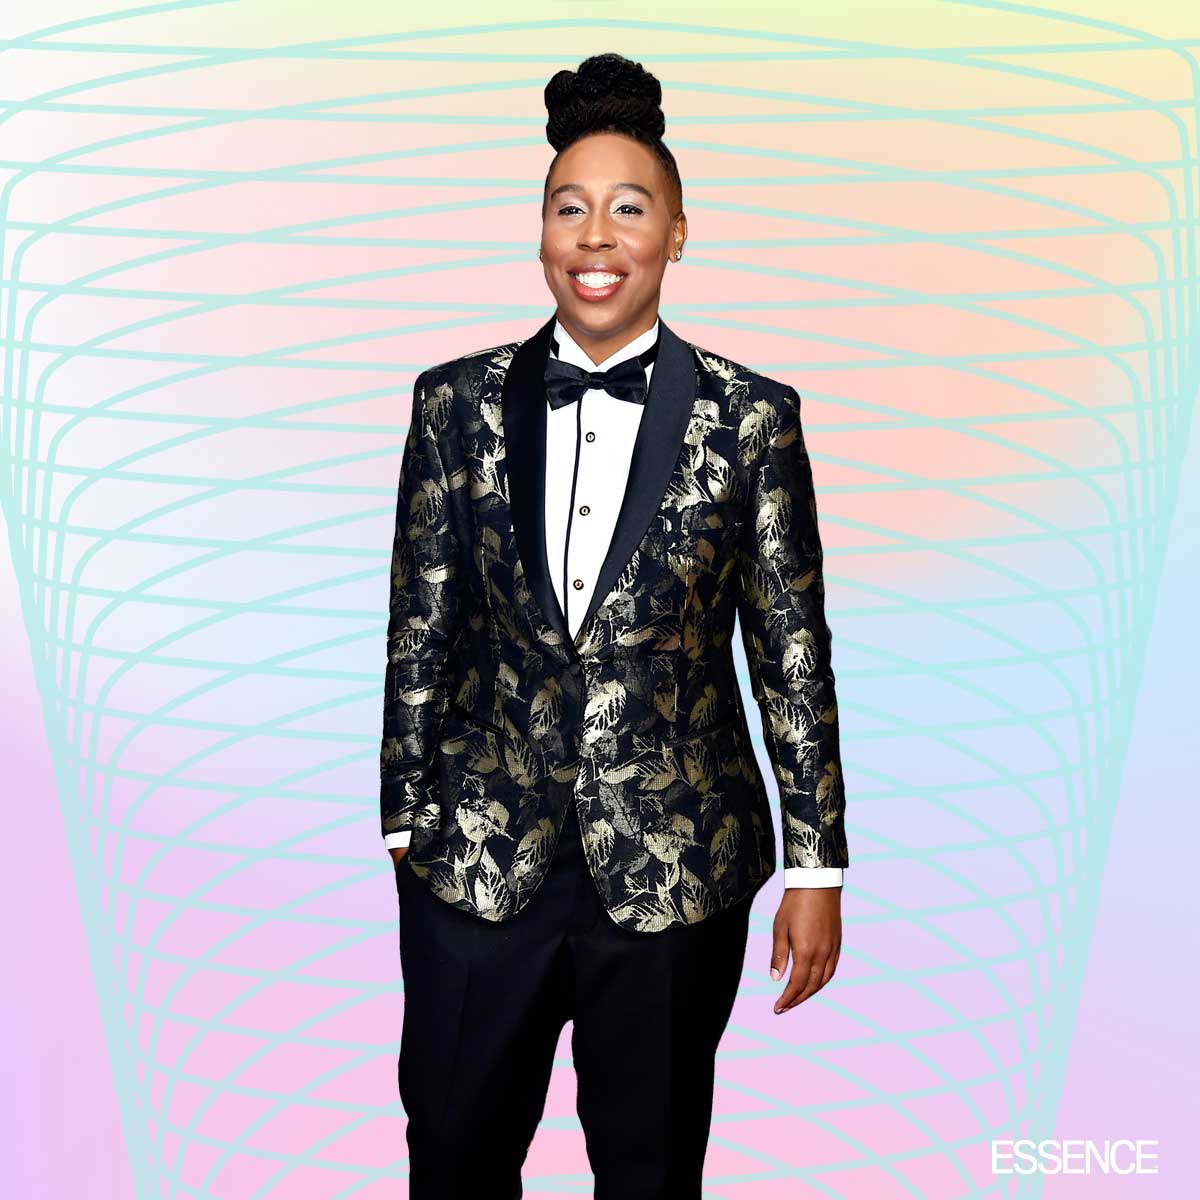 5 Things To Know About Emmy Winner Lena Waithe